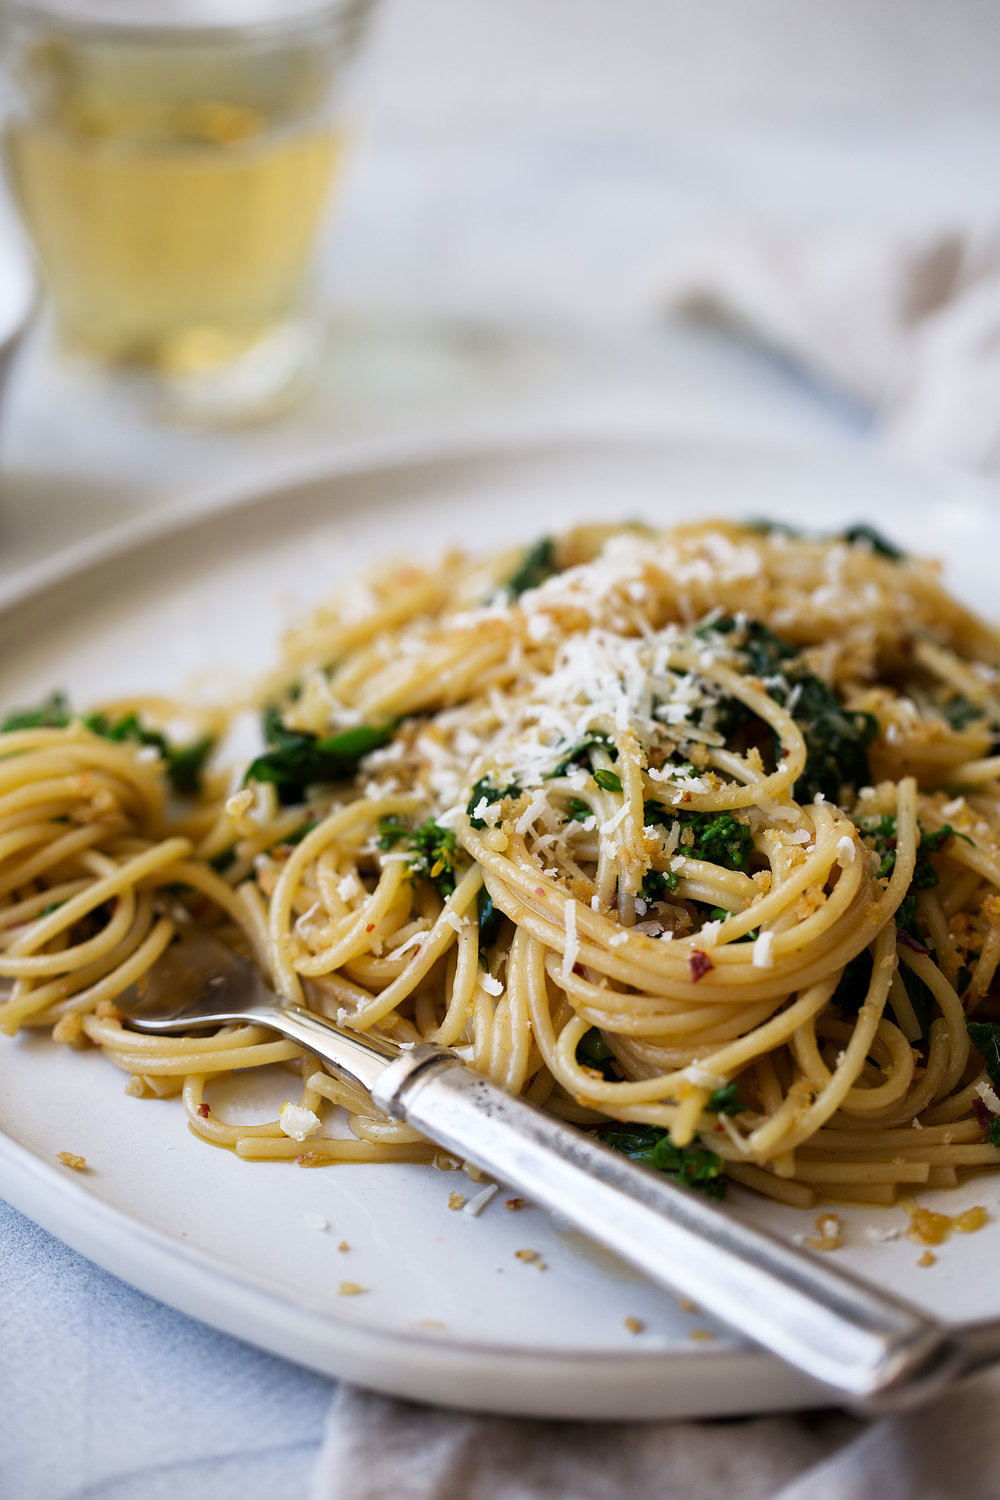 spaghetti with rapini, anchovy and chili oil topped with lemon breadcrumbs recipe